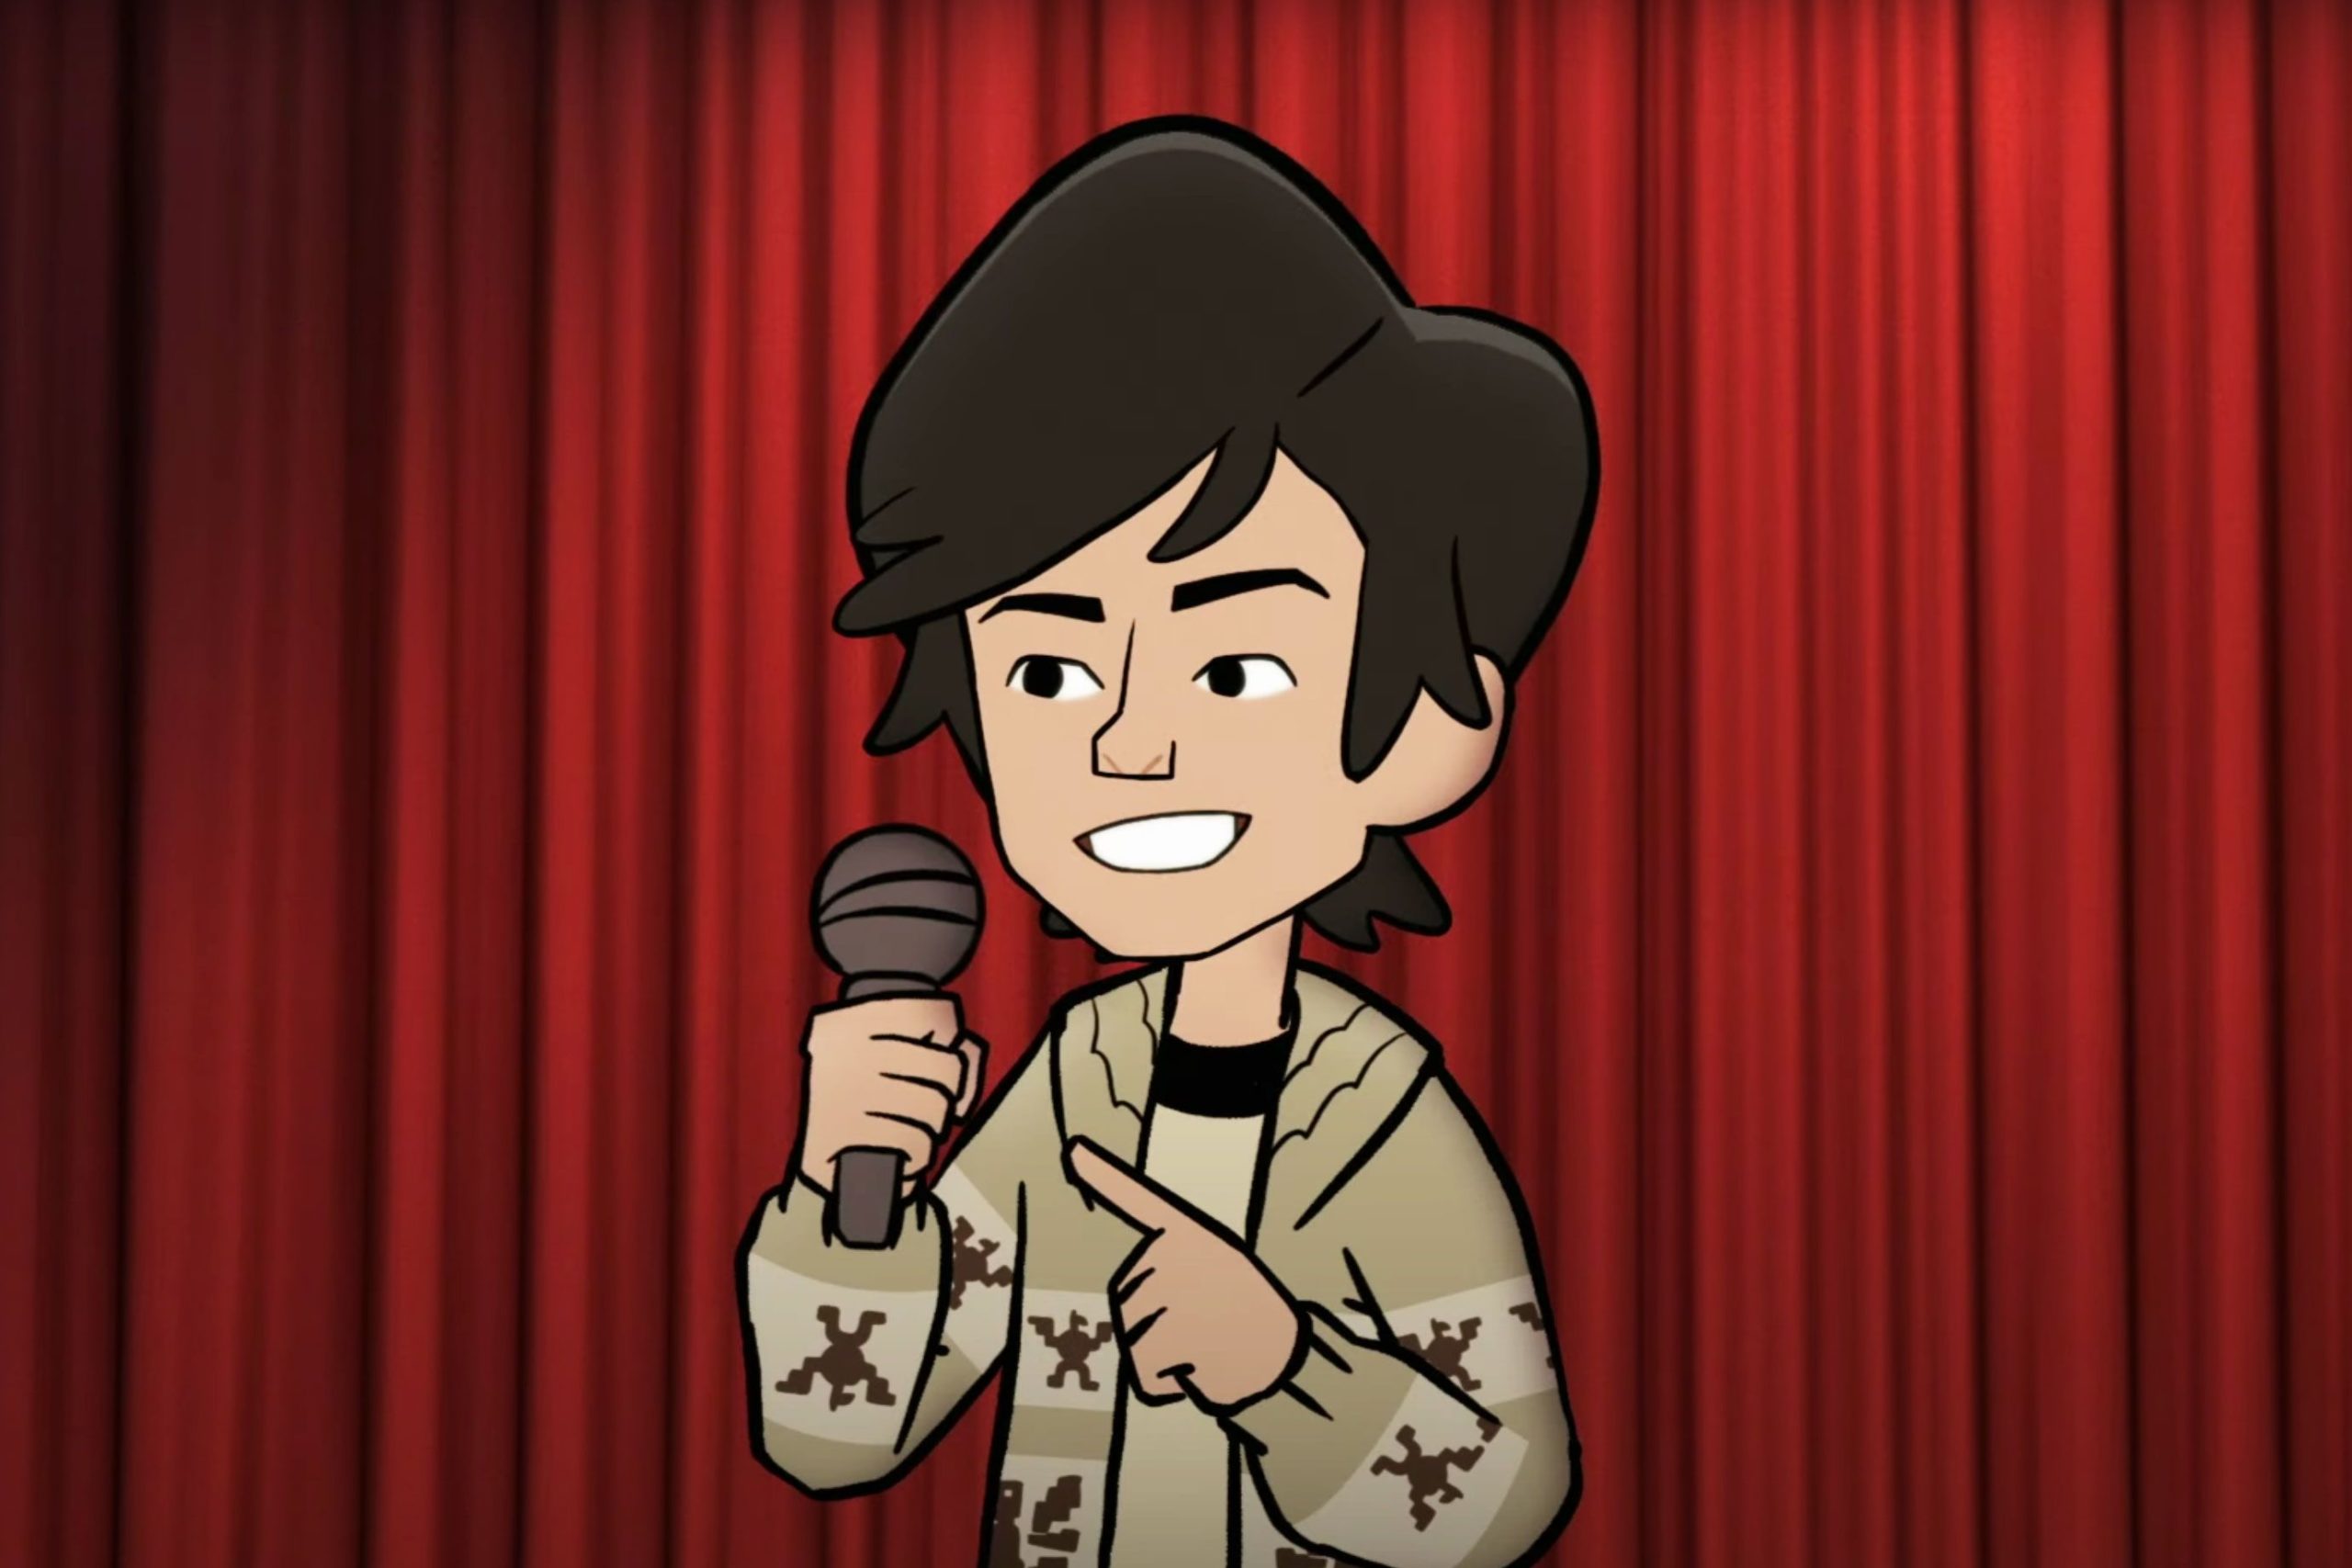 Tig Notaro: Drawn Watch Online for Free! HBO Original Special